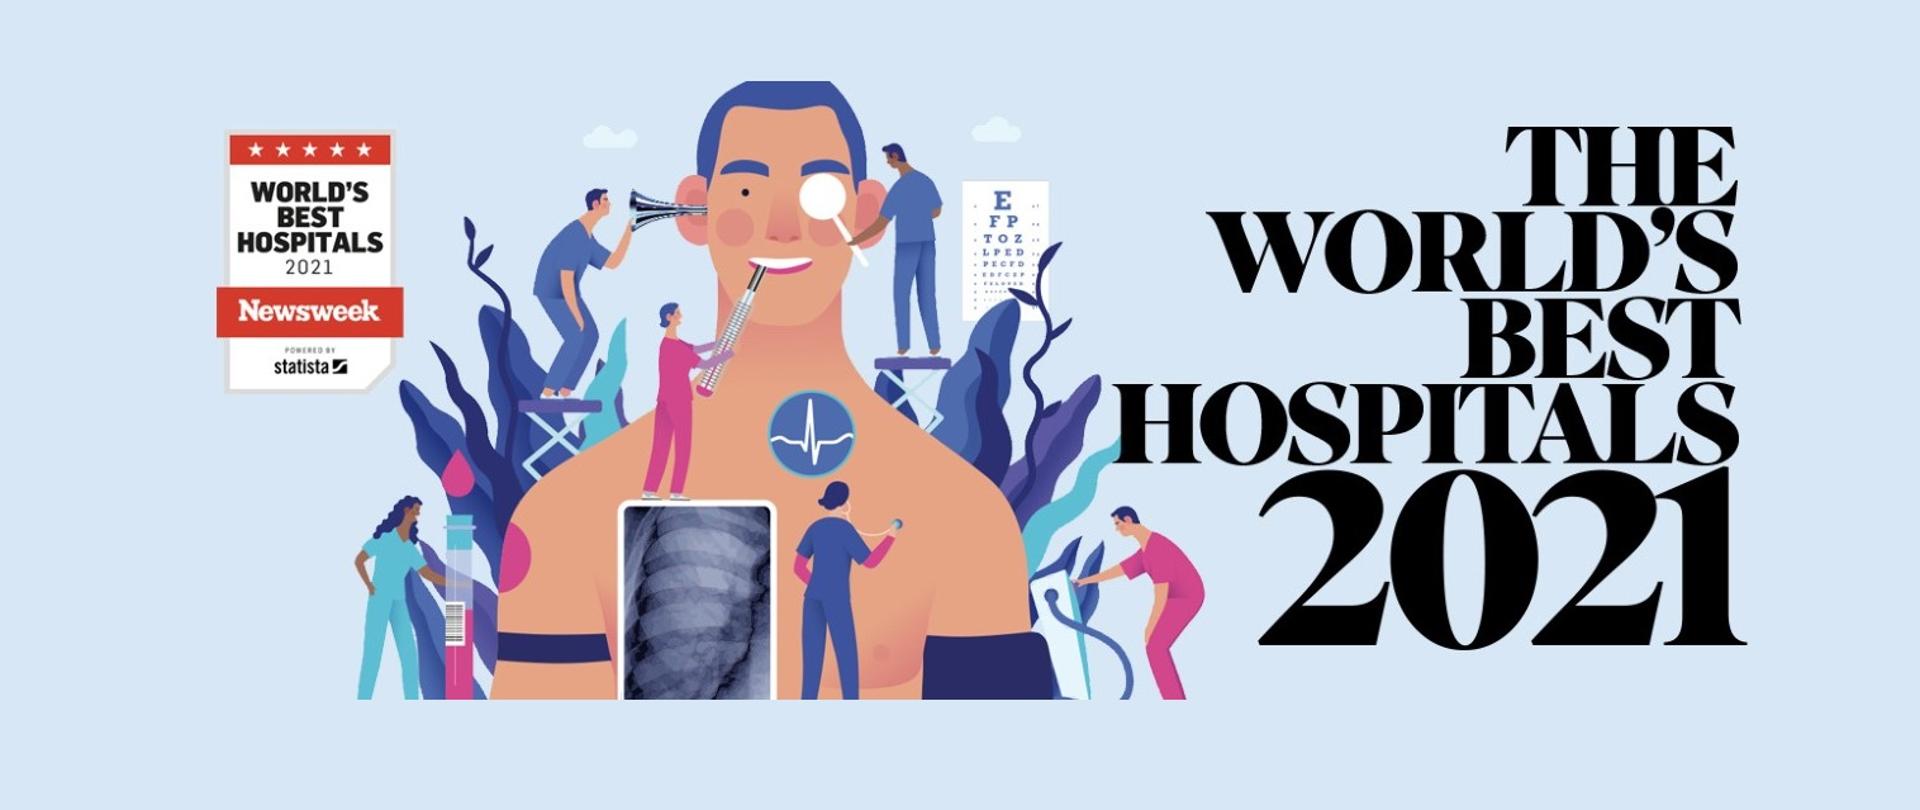 The Woeld's Best Hospitals 2021